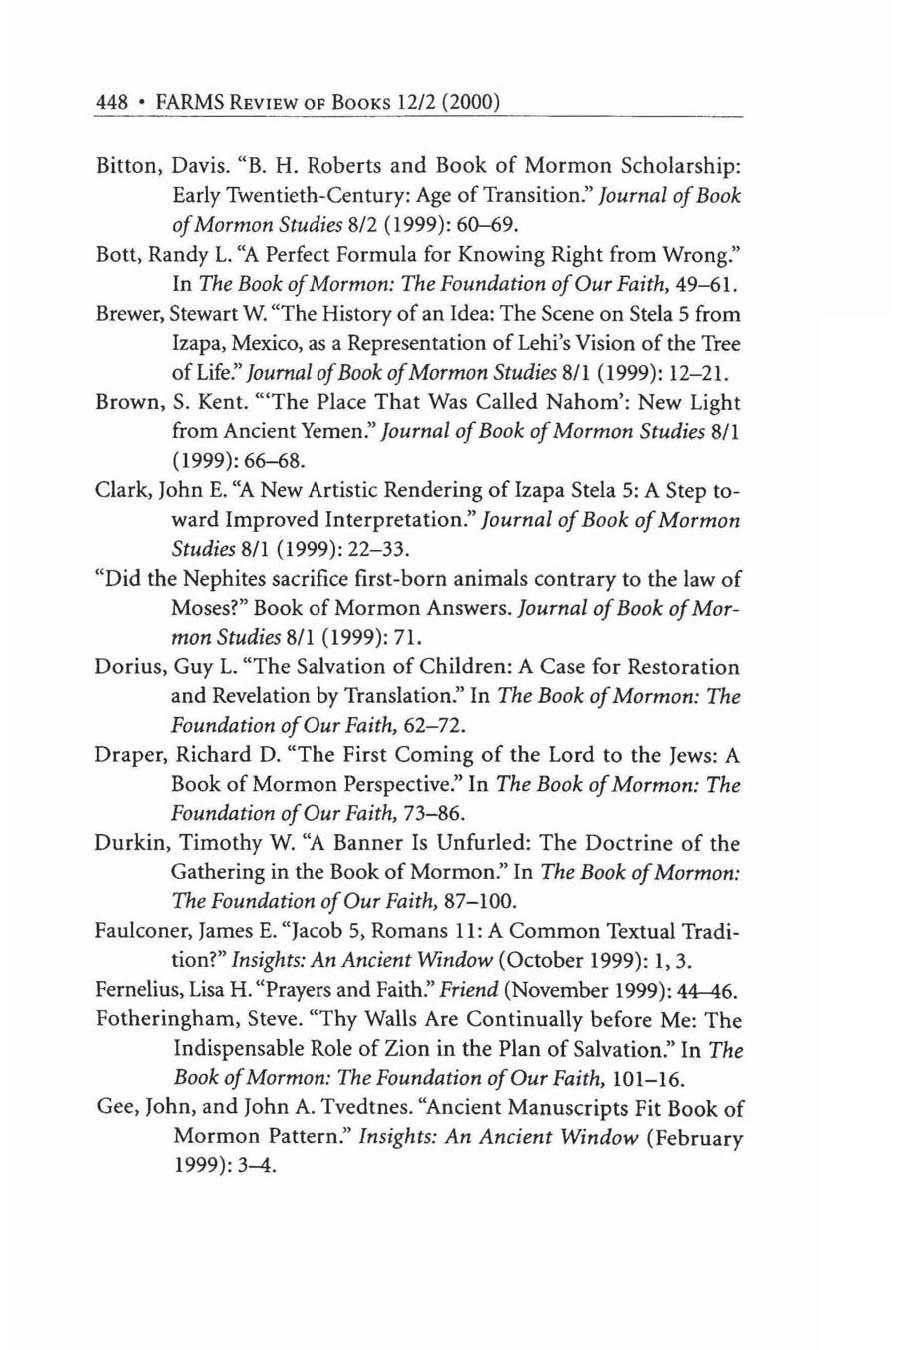 448 FARMS REVIEW OF BOOKS 12/2 (2000) Bitton, Davis. " B. H. Roberts and Book of Mormon Scholarship: Early Twentieth-Century: Age of Transition." Journal of Book of Mormon Studies 8/2 (1999): 60-69.